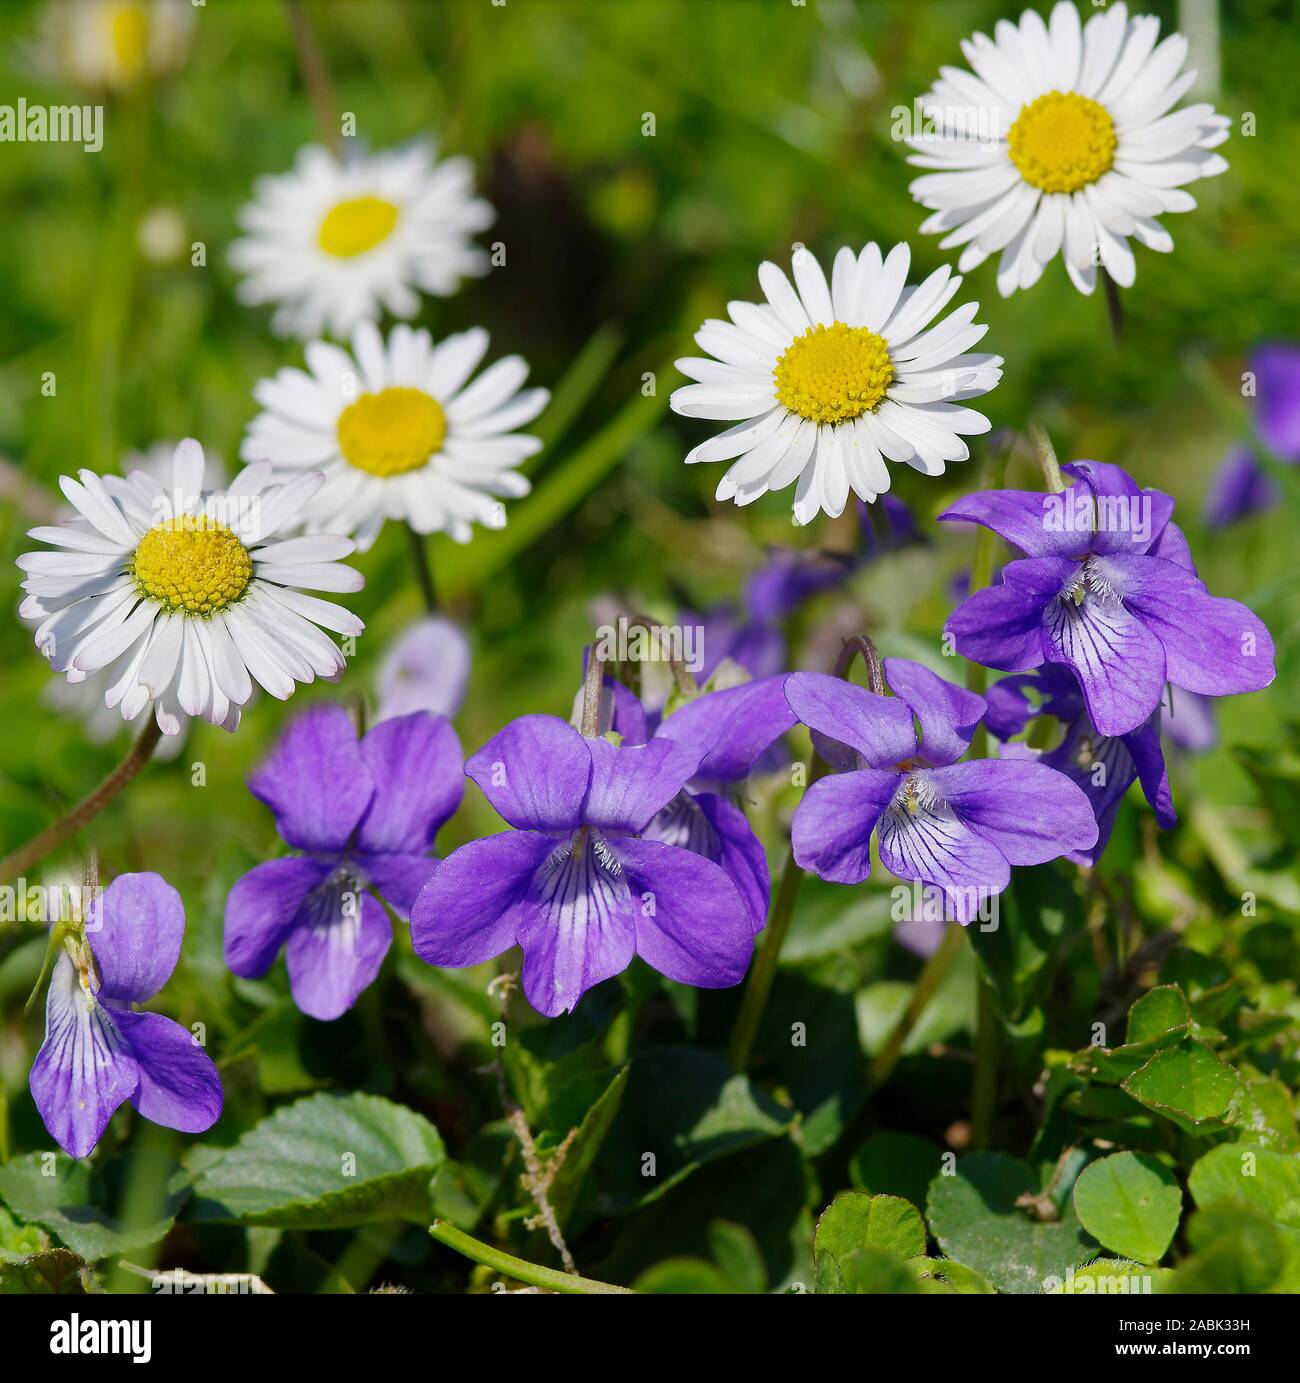 Early Dog-violet (Viola reichenbachiana) and Common Daisy, English Daisy, Meadow Daisy (Bellis perennis), flowering. Germany Stock Photo